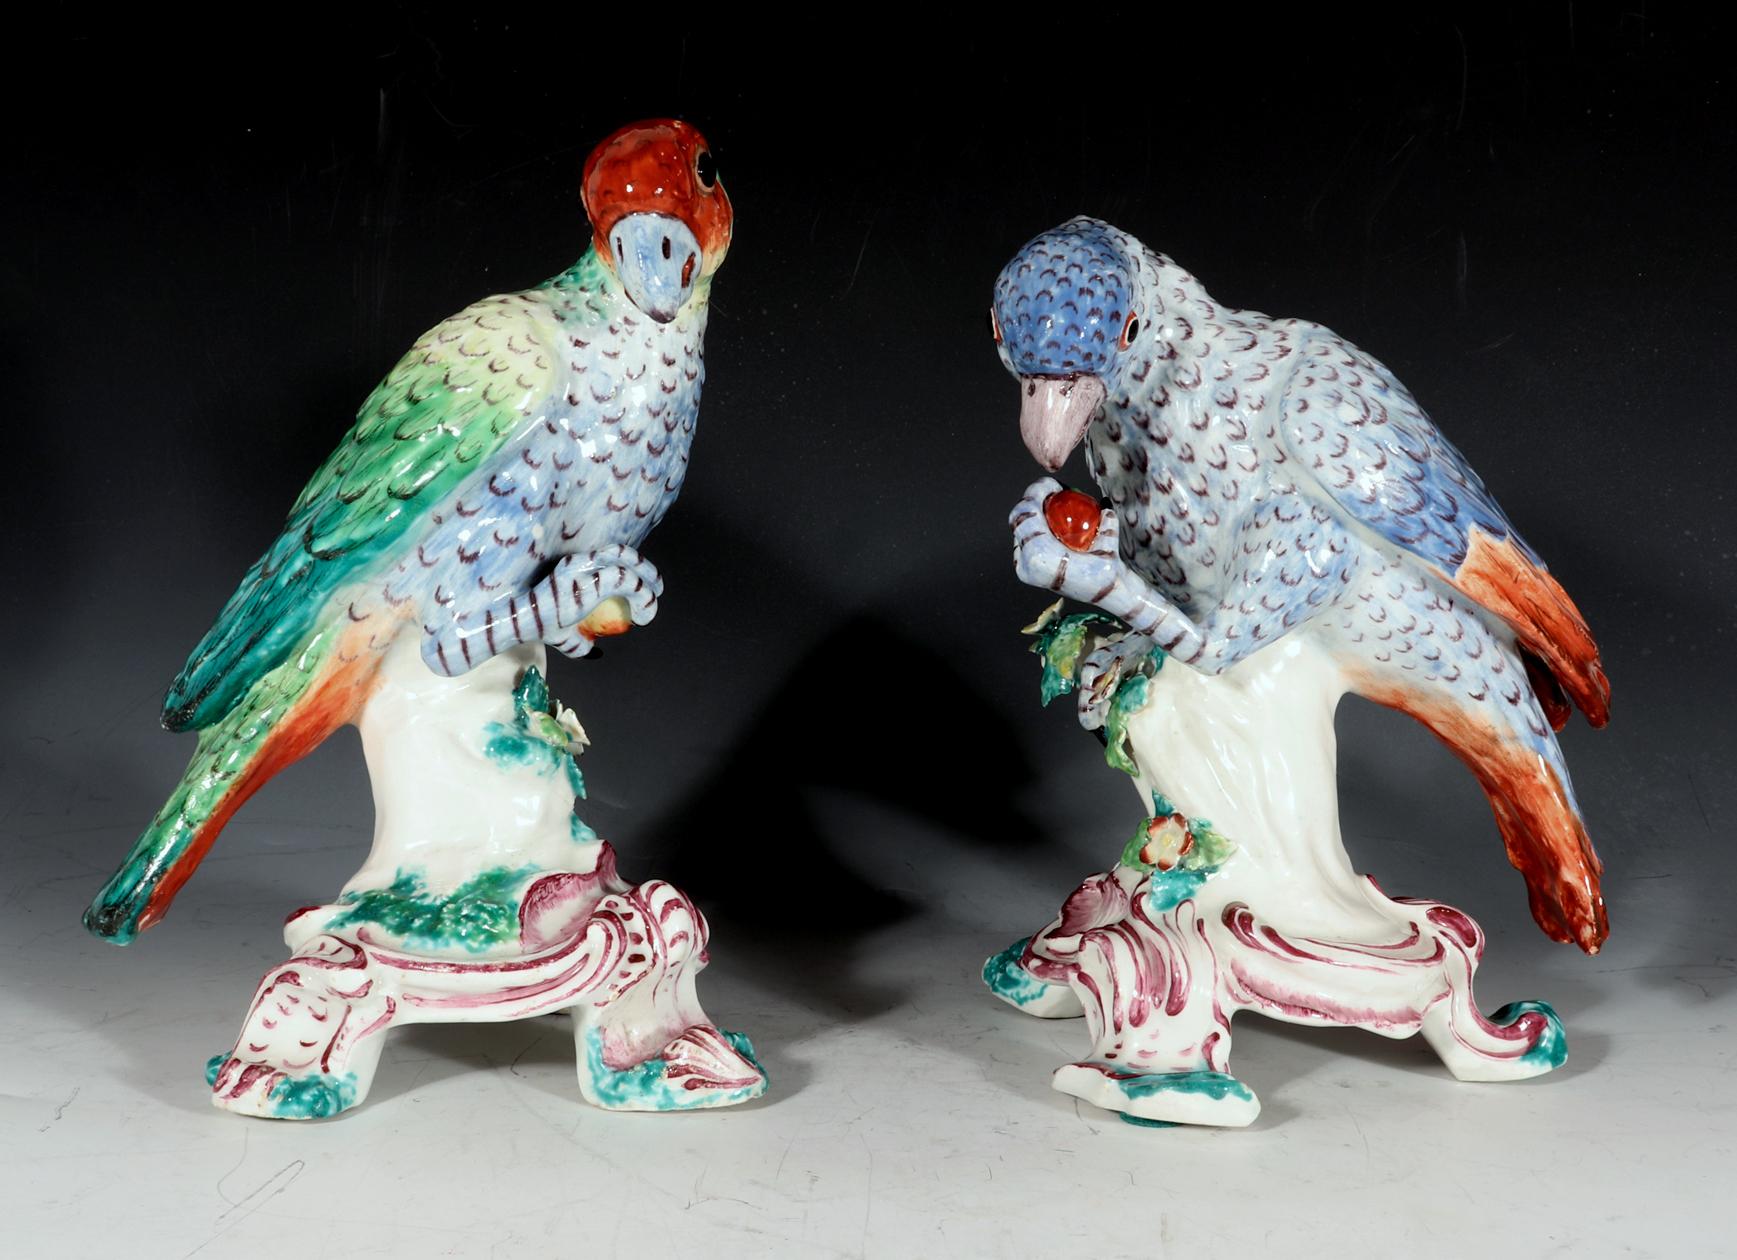 18th-century bow porcelain Models of South American Parrots,
Circa 1758-62

These beautiful Bow porcelain birds are naturalistically modelled, each perching on a flowering stump issuing from a rococo-scroll moulded base. They are both standing on